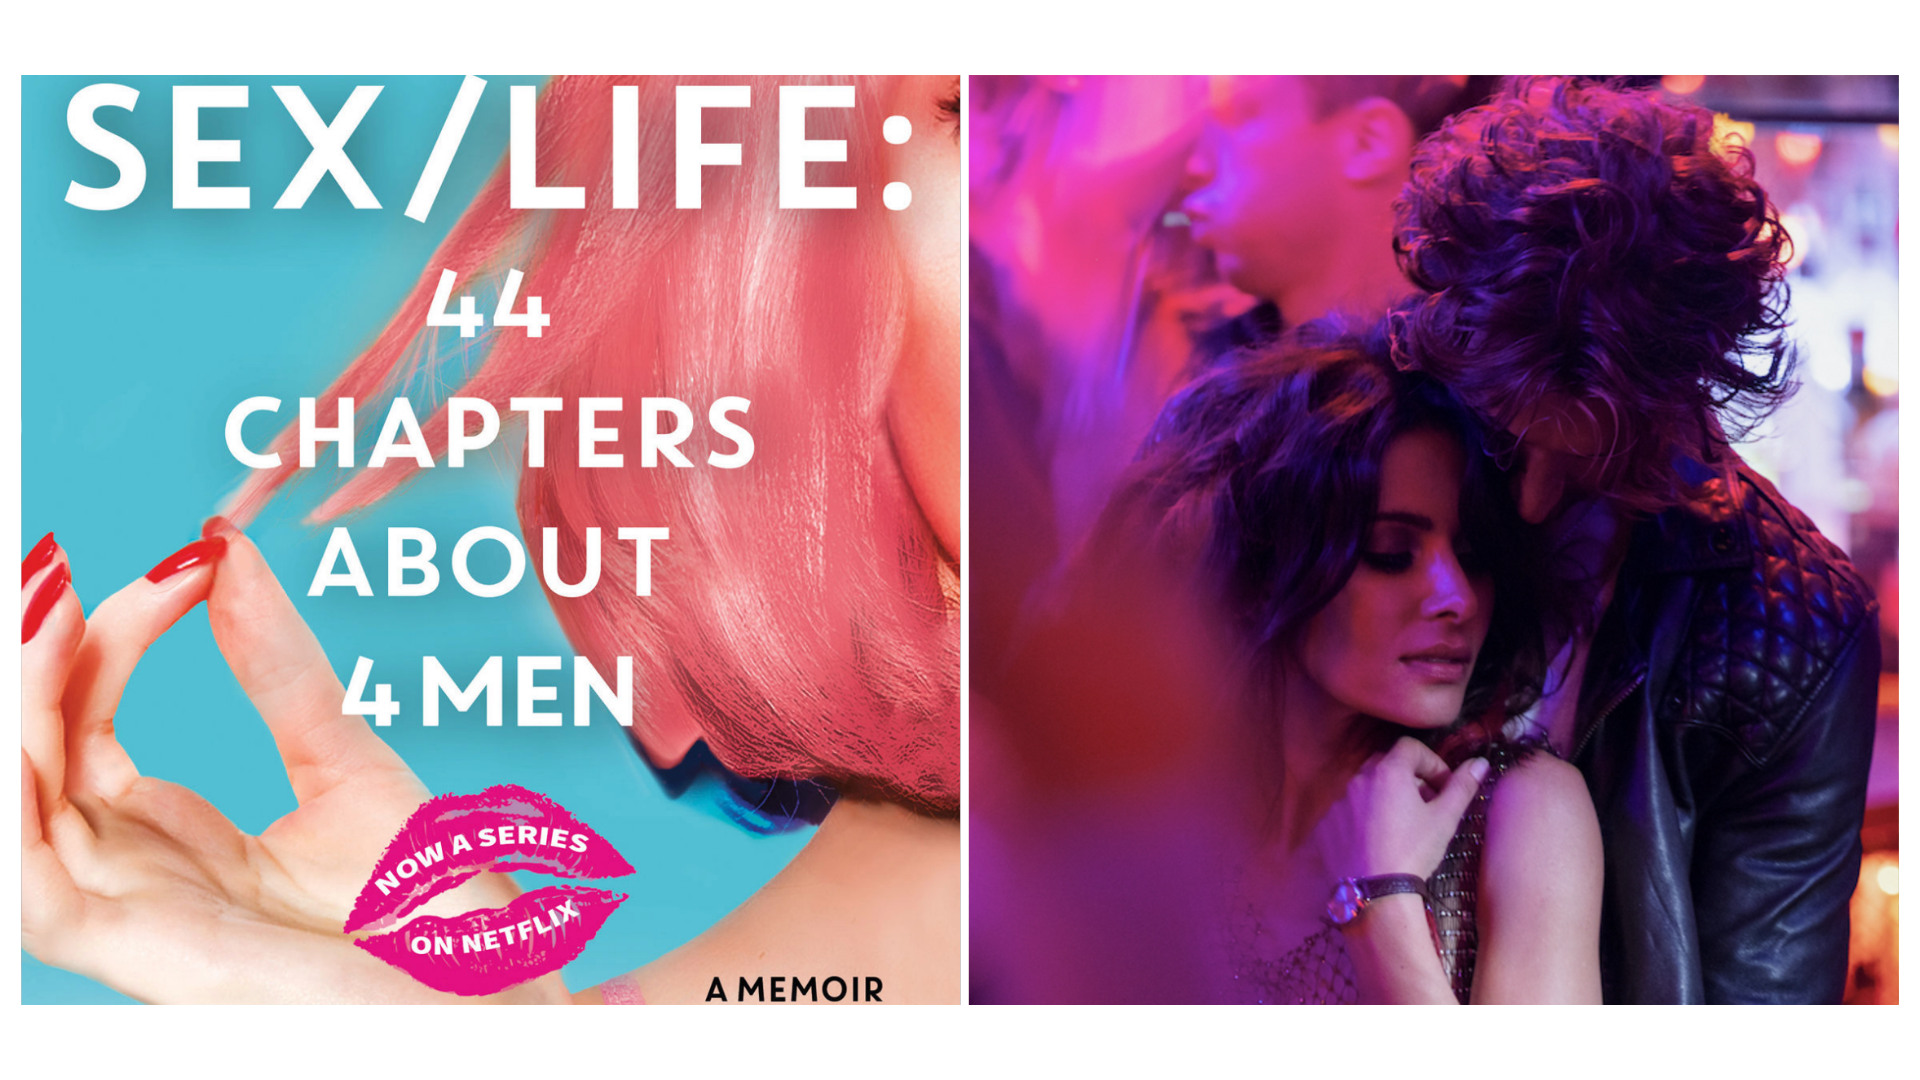 7 sexy books that will set you on fire just like Sex/Life